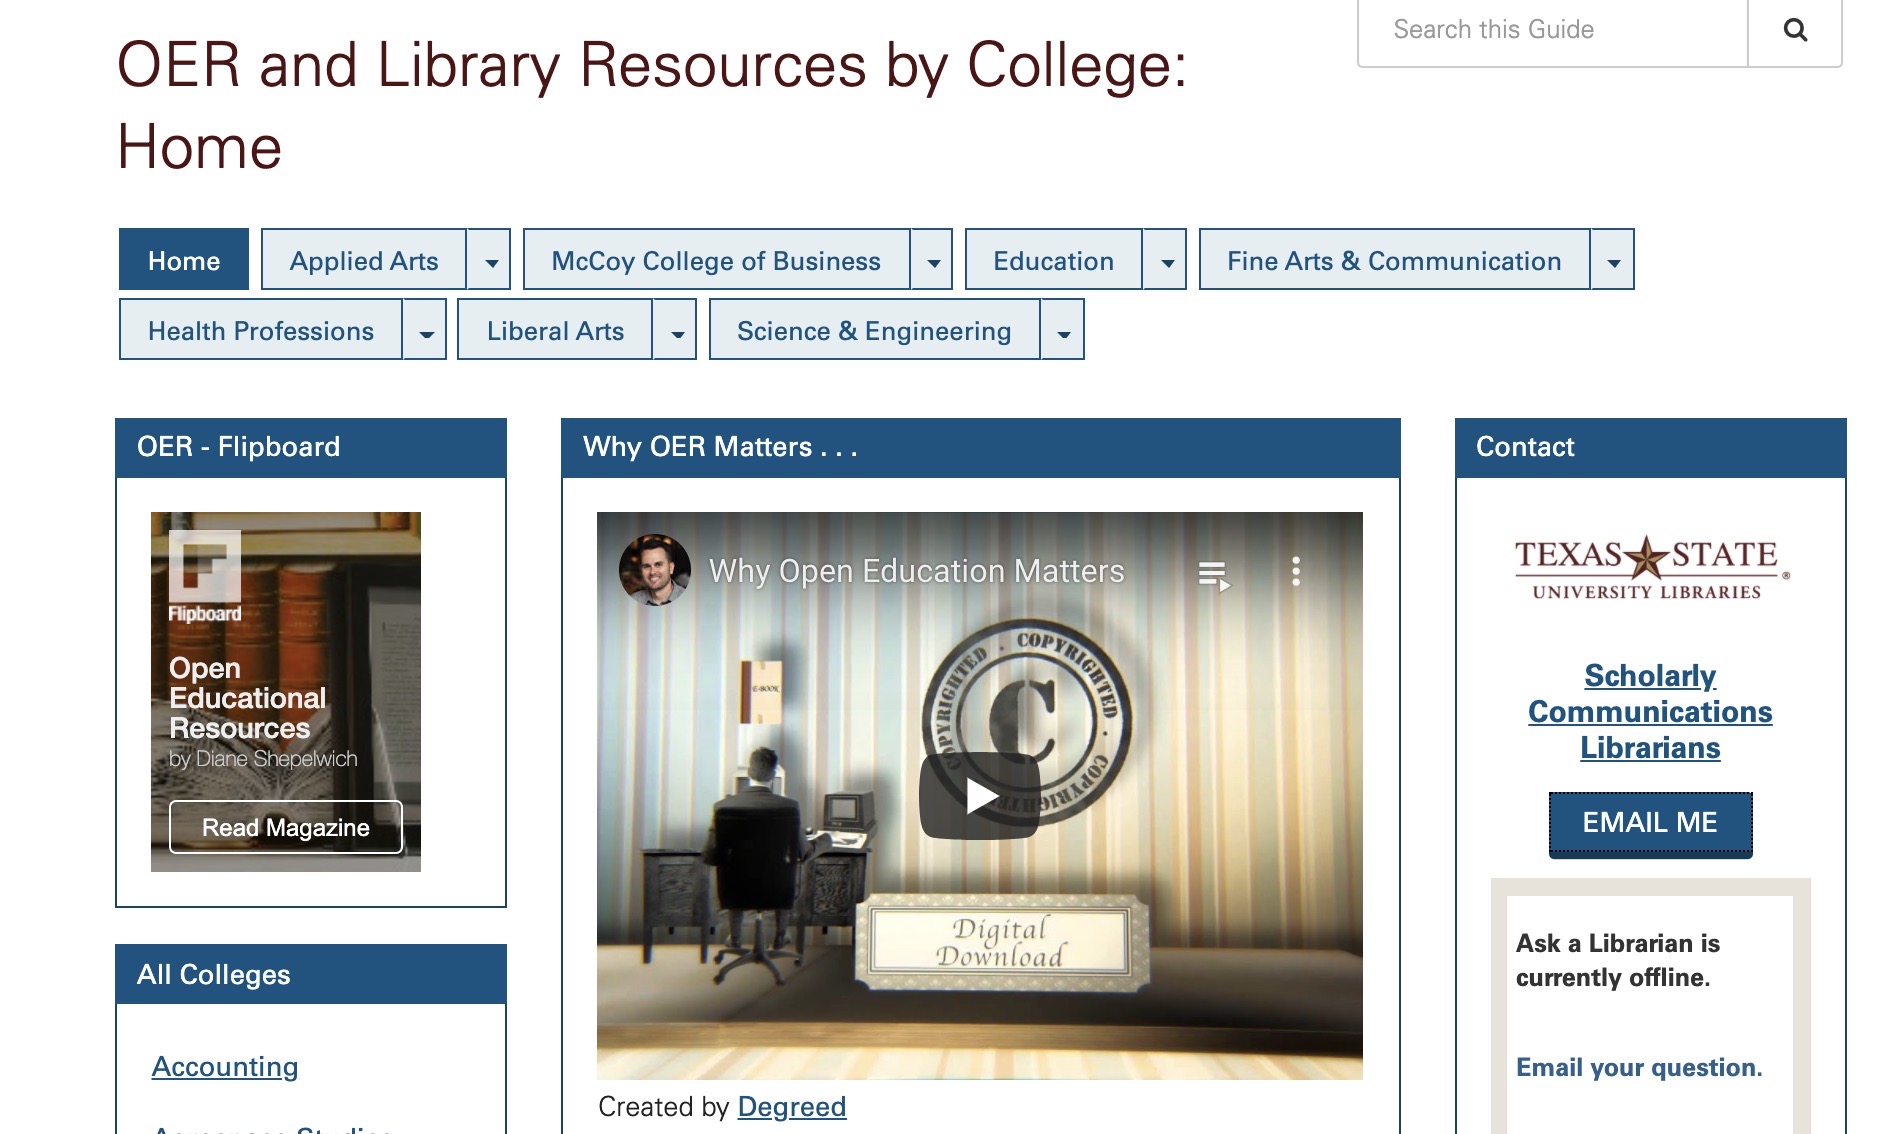 Screenshot of the Texas State University Libraries LibGuide of OERs by subject